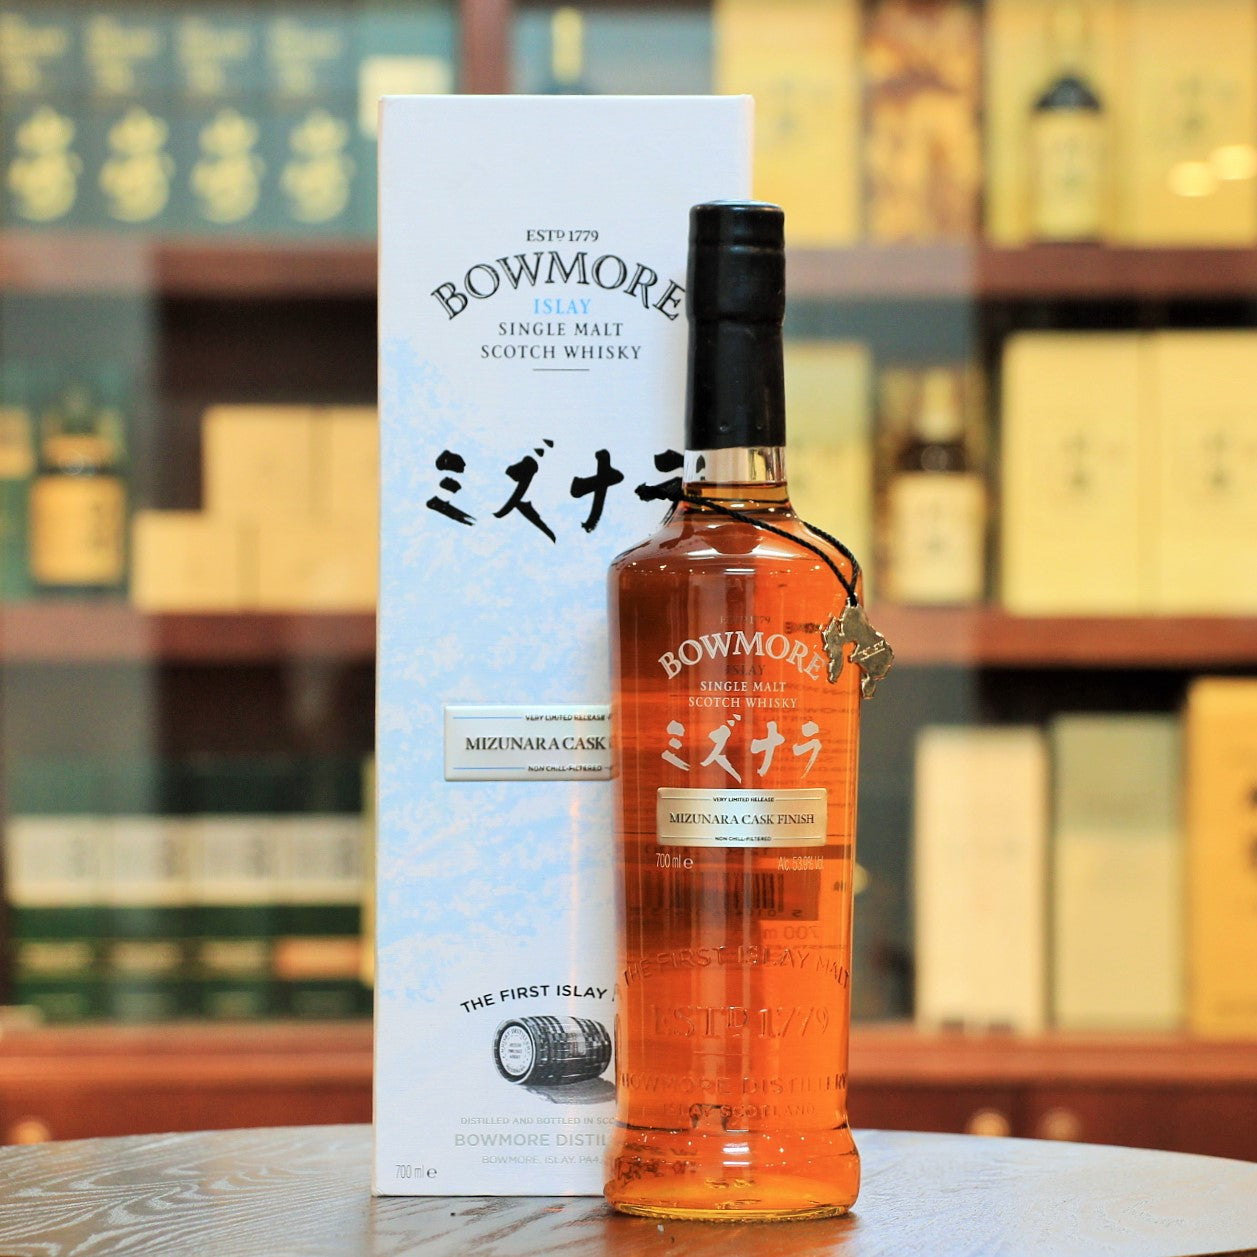 Bowmore Mizunara Cask Single Malt Whisky Limited Edition, Bowmore Official Tasting Notes (Website) for this bottling. Color: Warm amber Nose: Spicy, mellow sweetness carried on a fresh ocean breeze Palate : Sweet vanilla, cedar wood, exotic mango and honey rose blossom Finish: Floral spice and fragrant smoke. Only 2000 bottles were released in 2015.